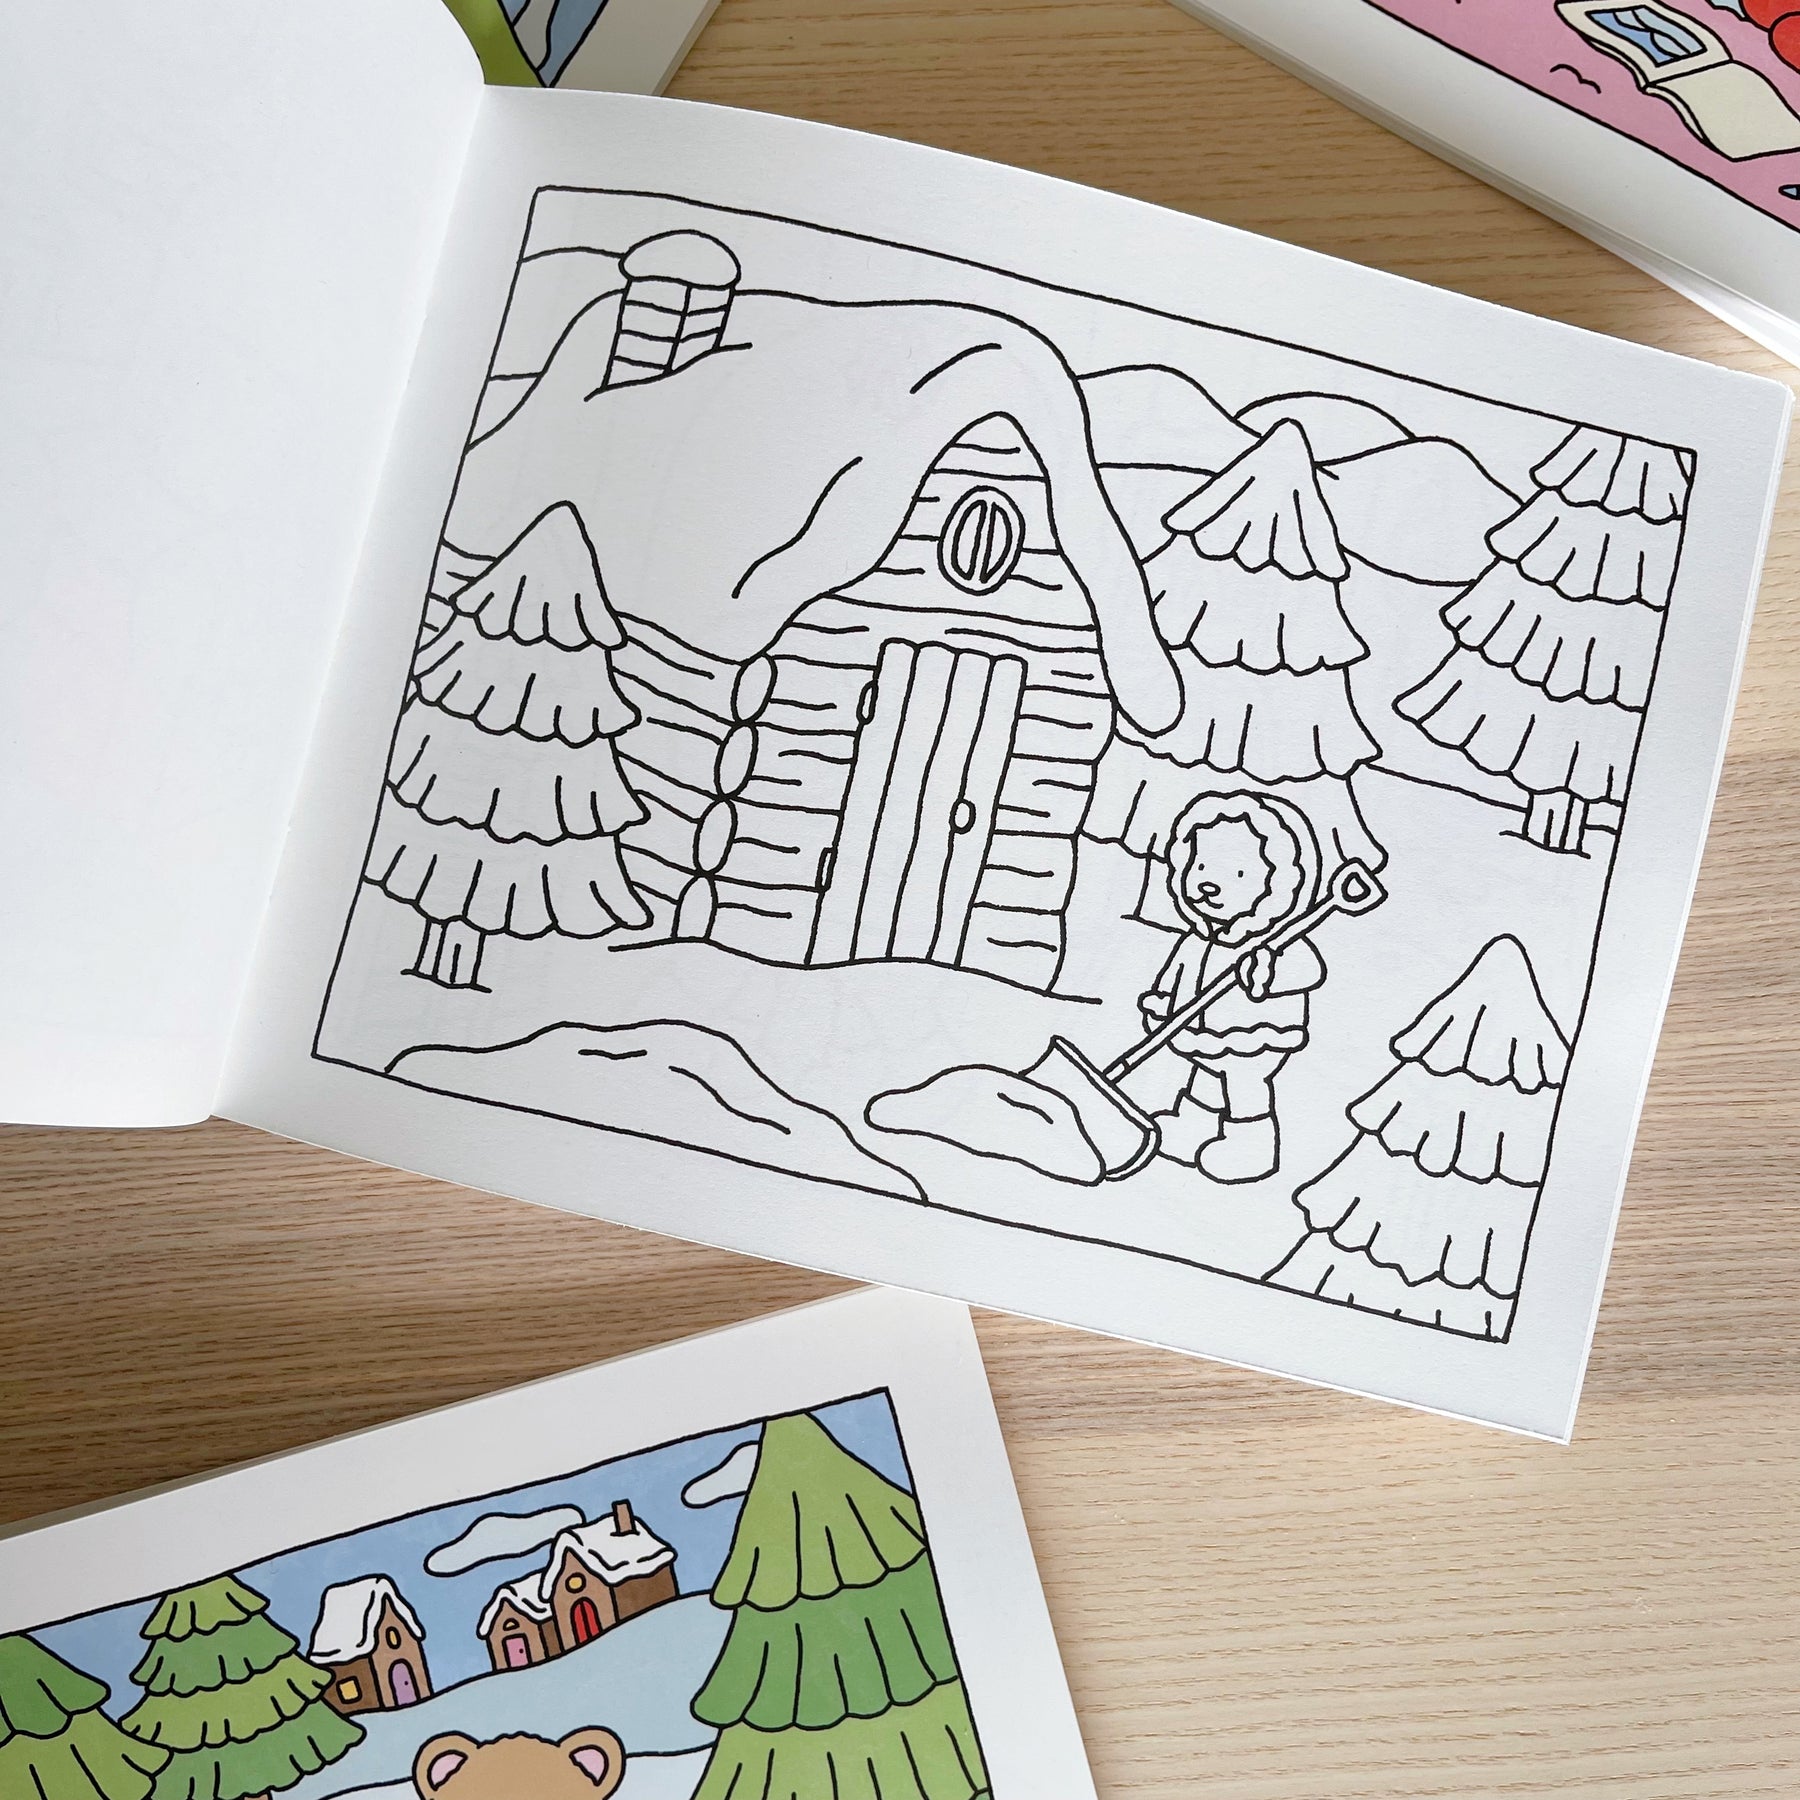 Bobbie Goods Coloring Book: Bobbie Goods Coloring Pages With